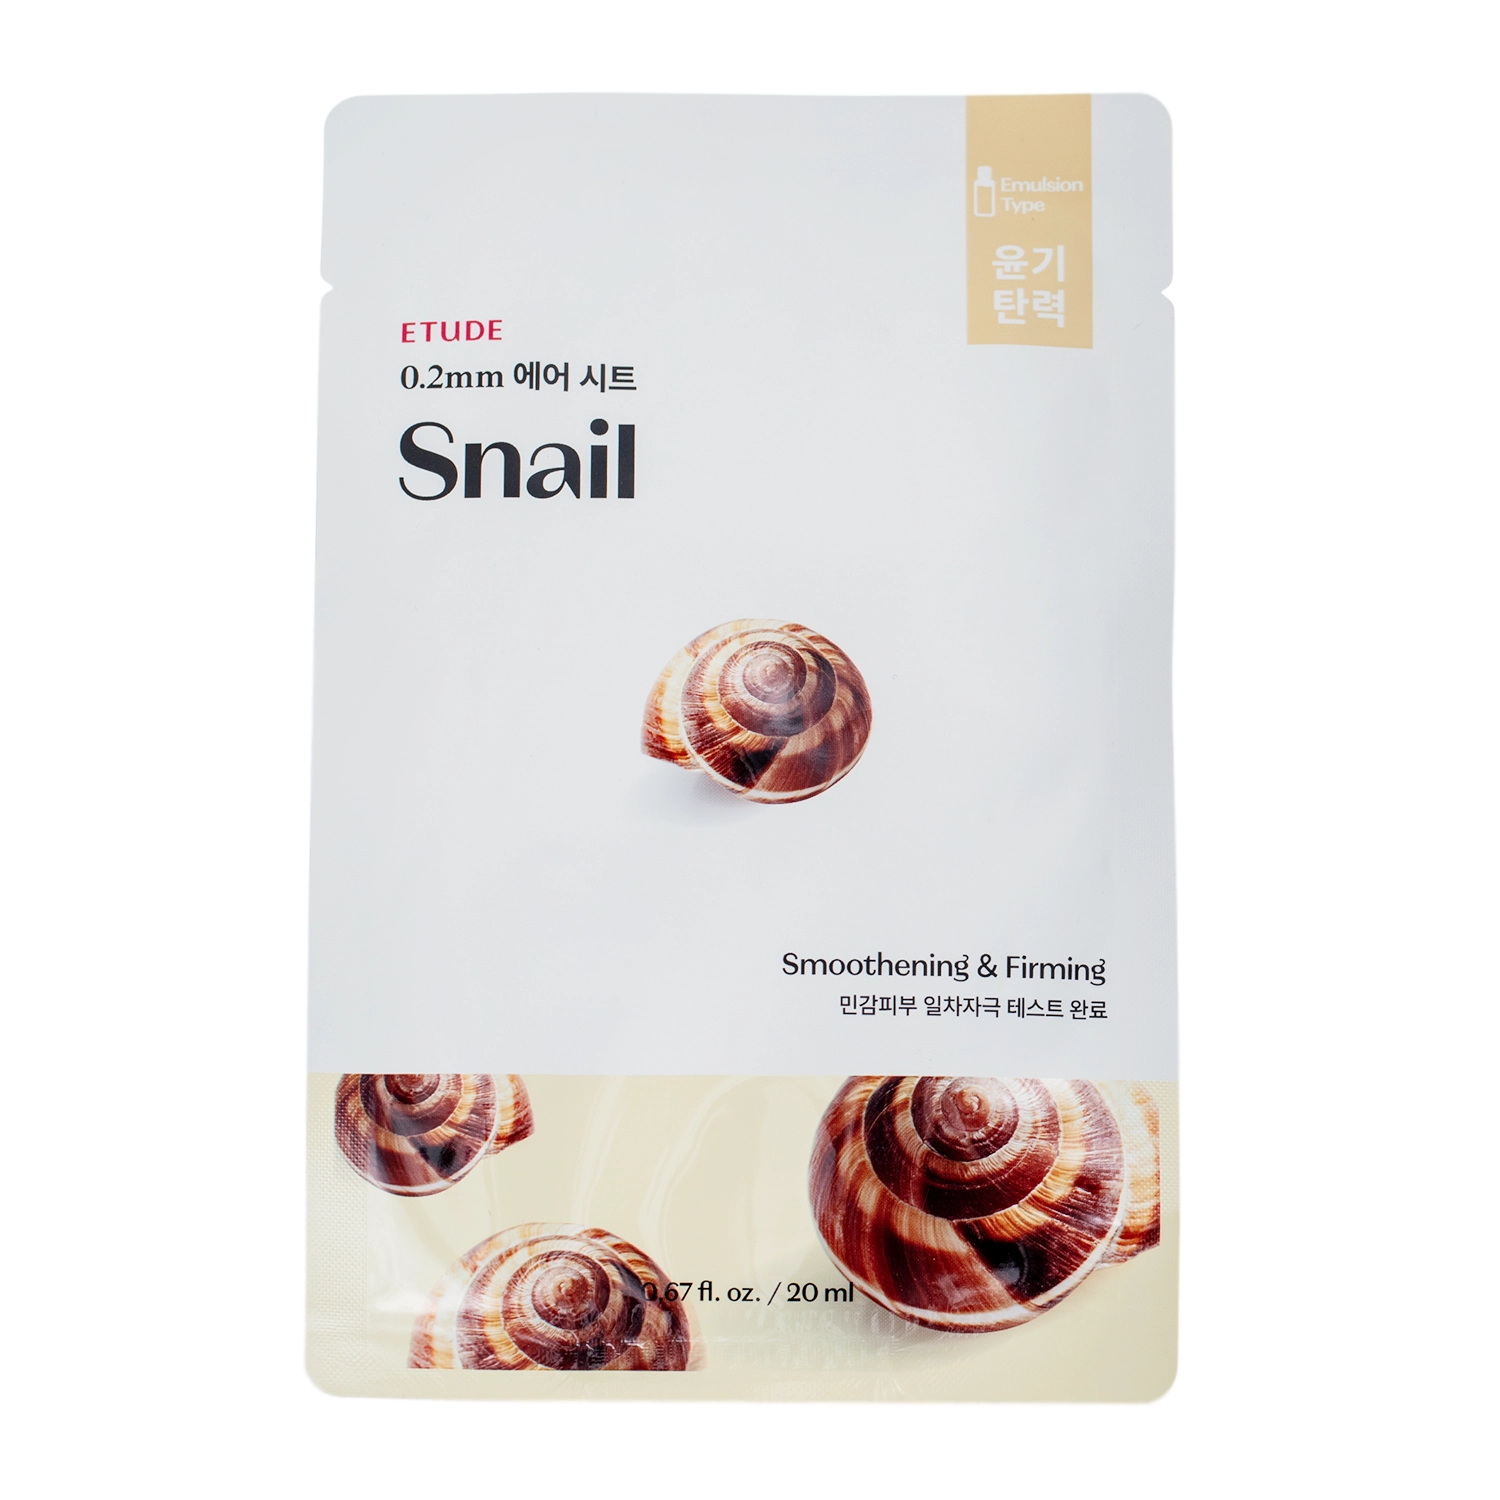 Etude House - Маска с экстрактом муцина улитки - 0.2mm Therapy Air Mask - Snail - 20ml